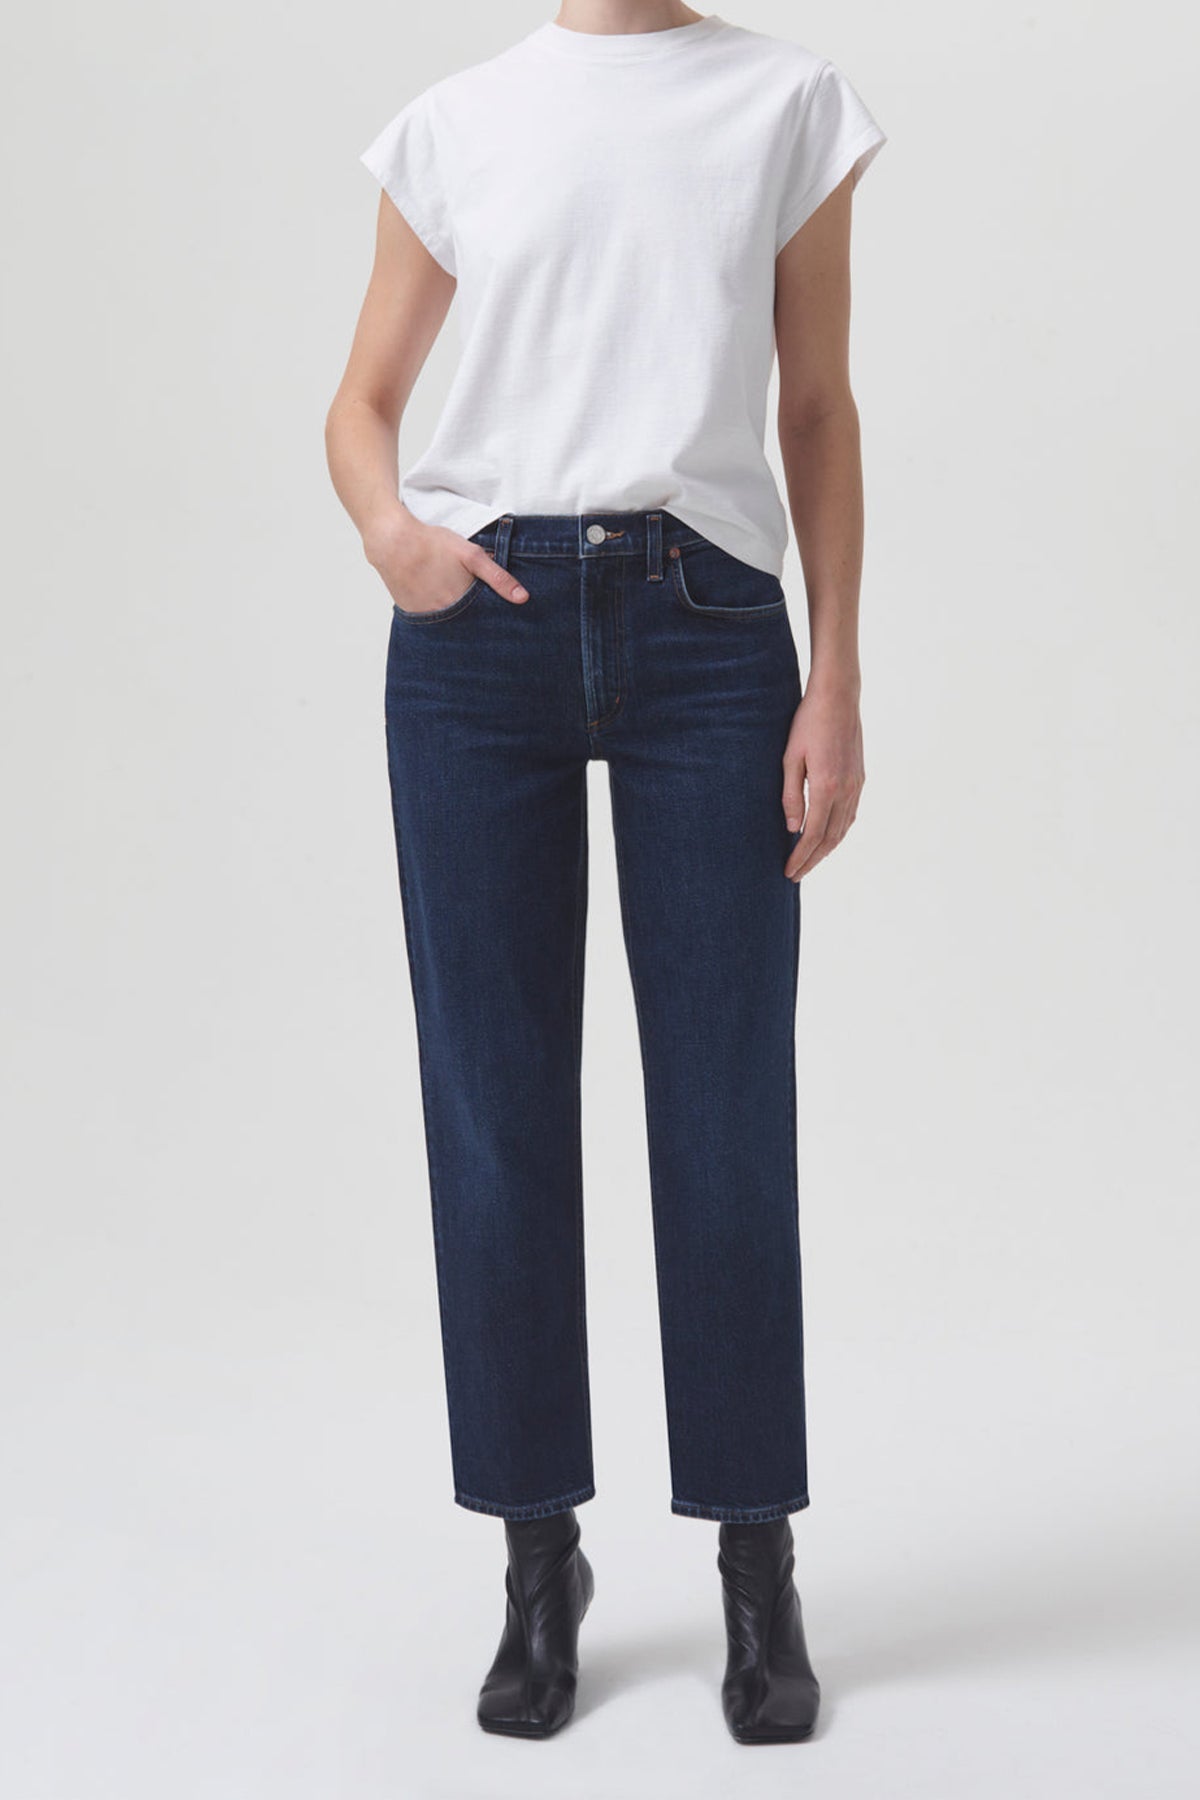 Kye Mid-Rise Straight Crop Jean in Song - shop-olivia.com